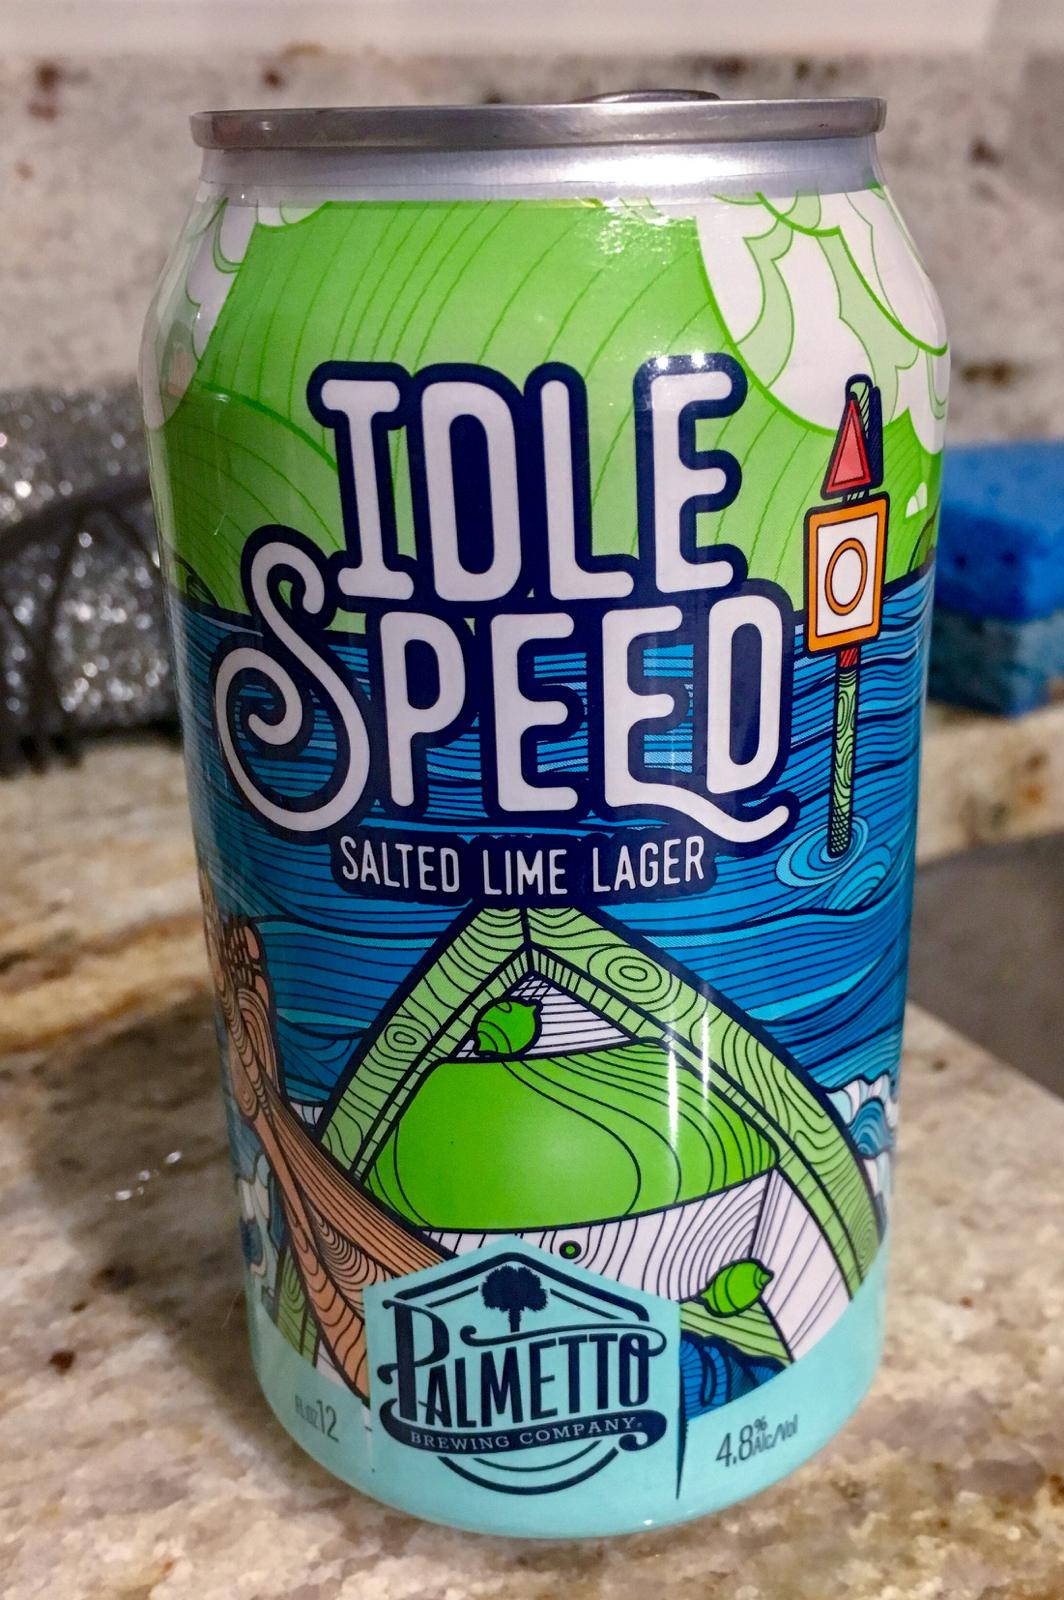 Idle Speed Salted Lime